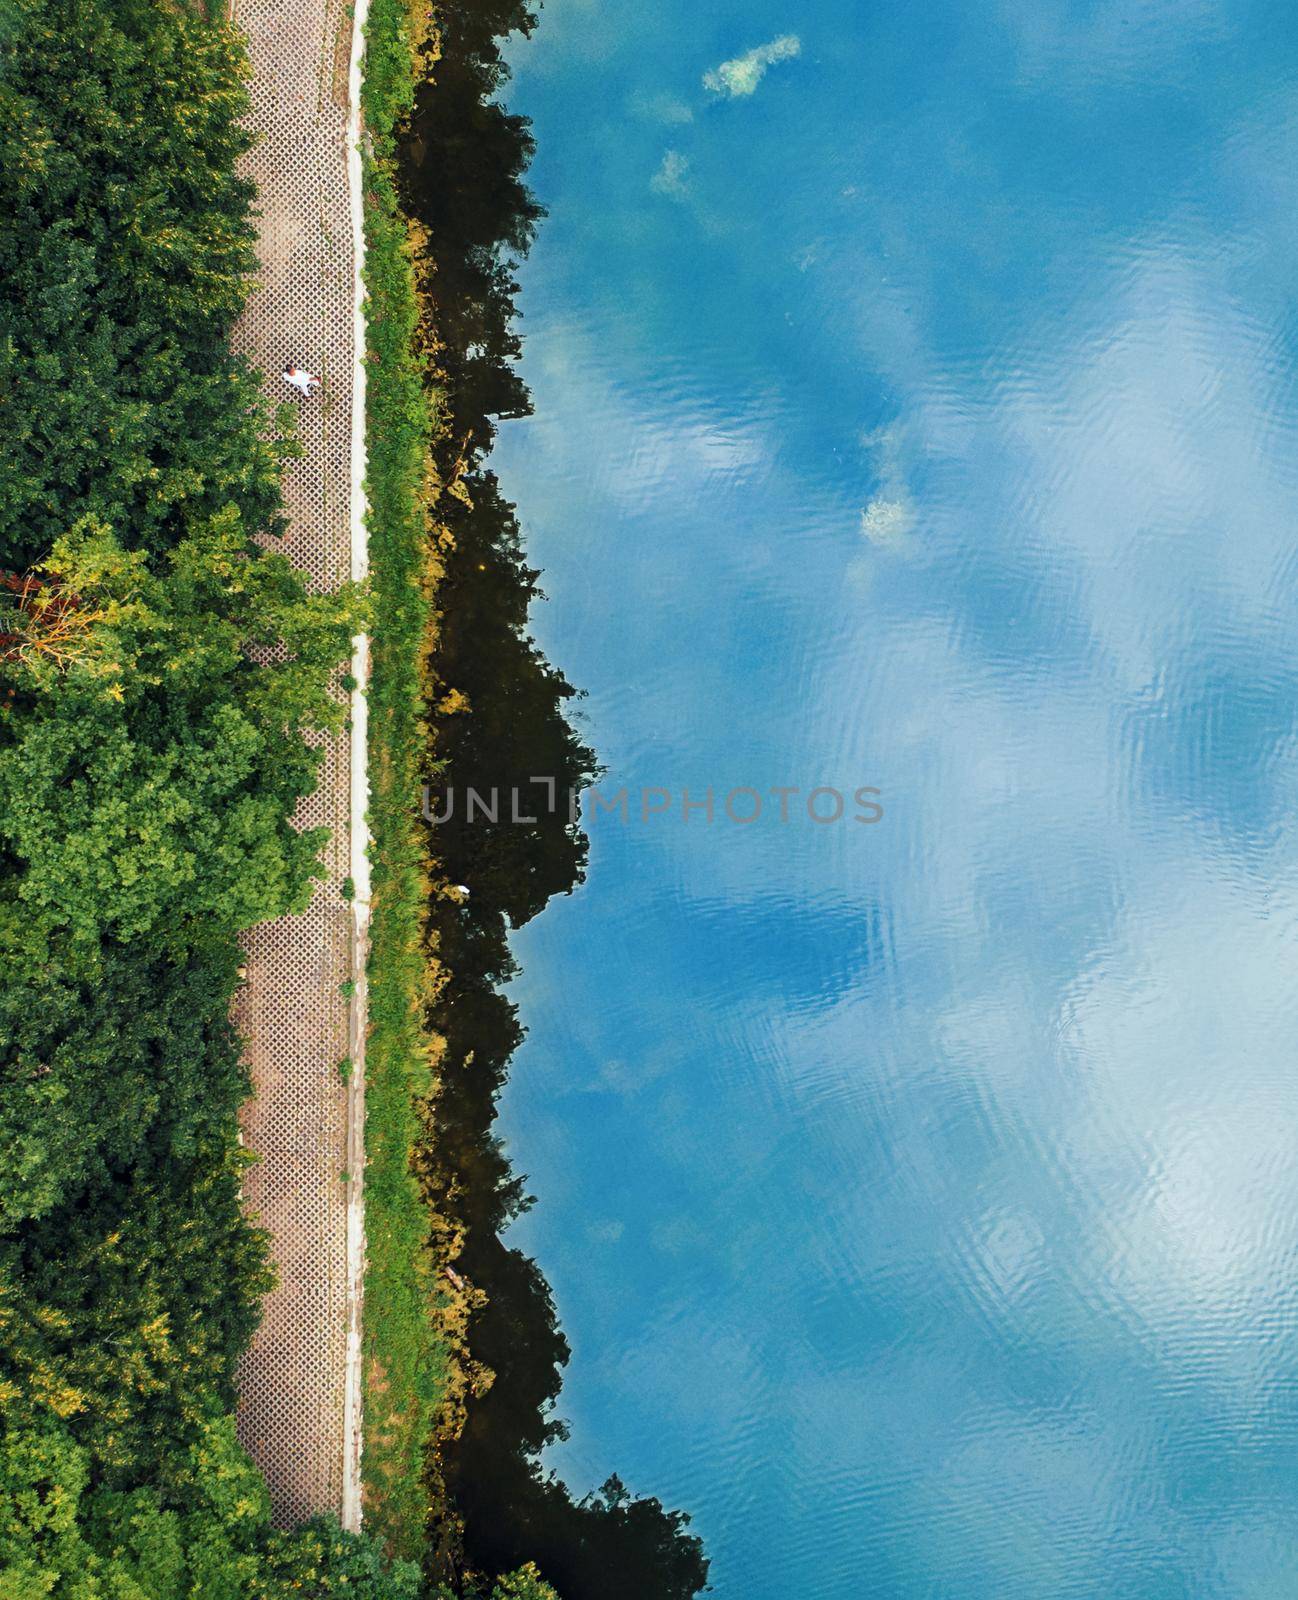 Bblue water surface of lake with reflecting clouds, top view. Narrow strip of shore along lake and man walking along shore. Countryside woodland or park. Drone shoot above scenic landscape, coastline